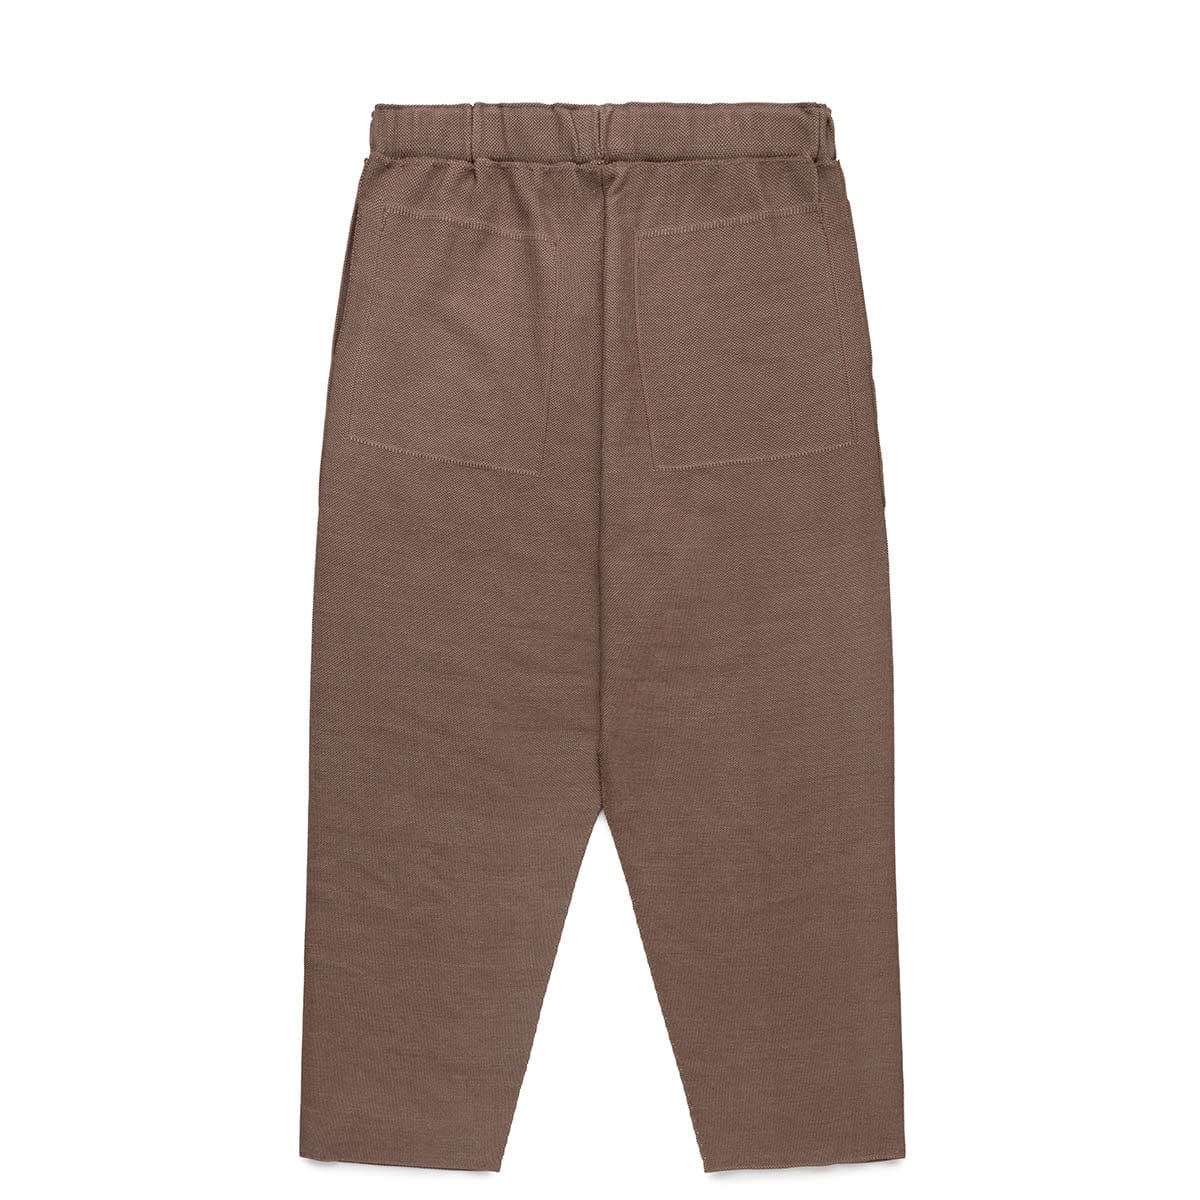 Homme Plissé Issey Miyake Bottoms 44-BROWN / O/S INLAID KNIT TROUSERS